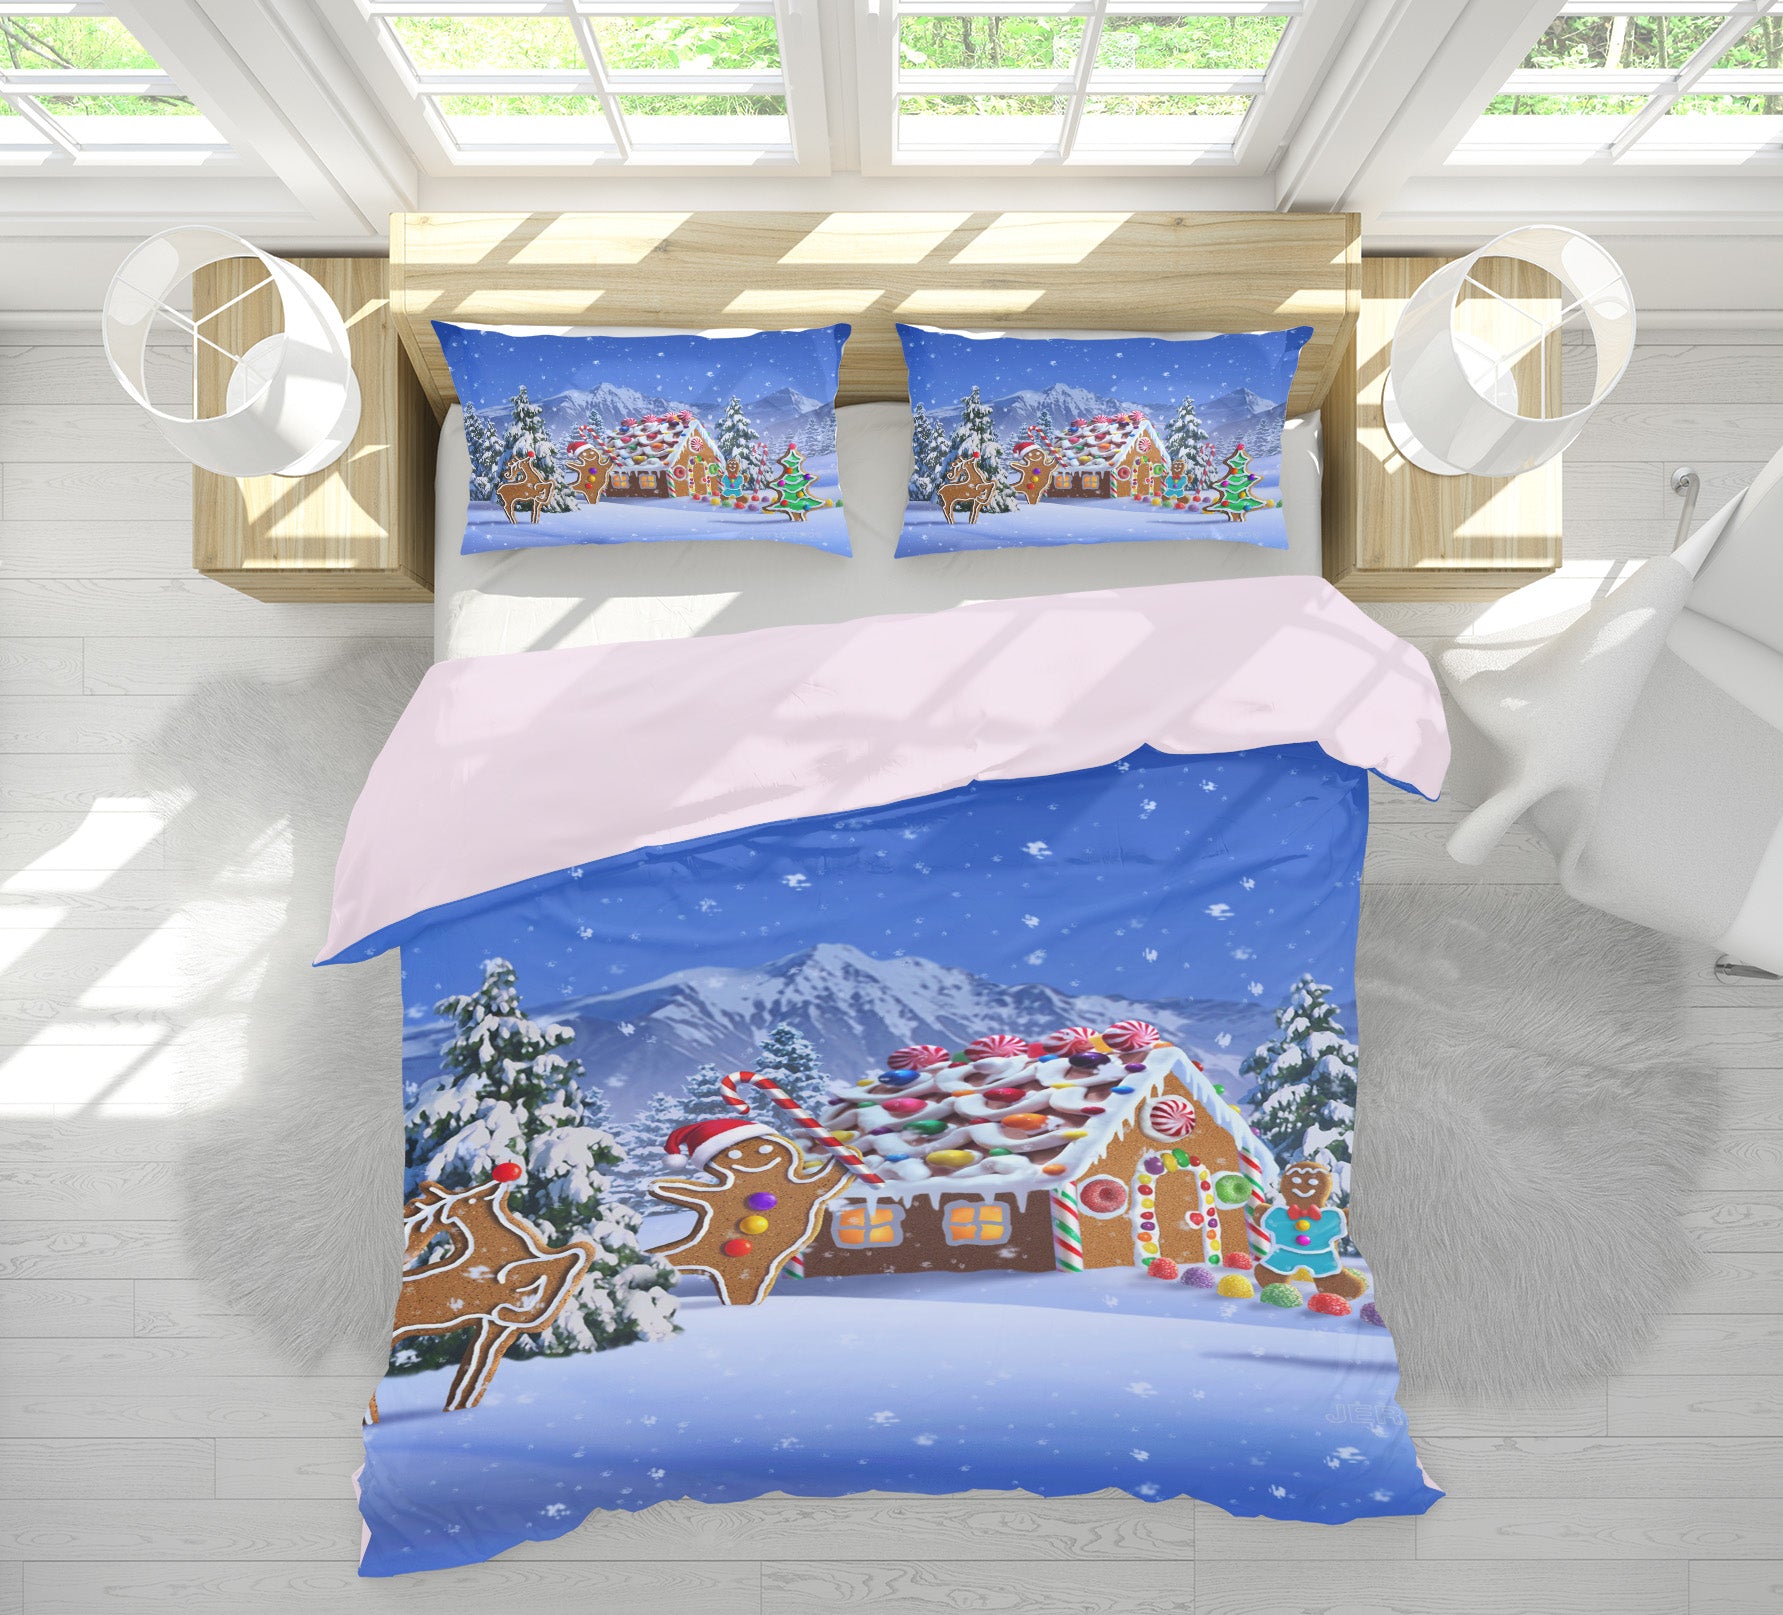 3D Gingerbread Fantasy 2122 Jerry LoFaro bedding Bed Pillowcases Quilt